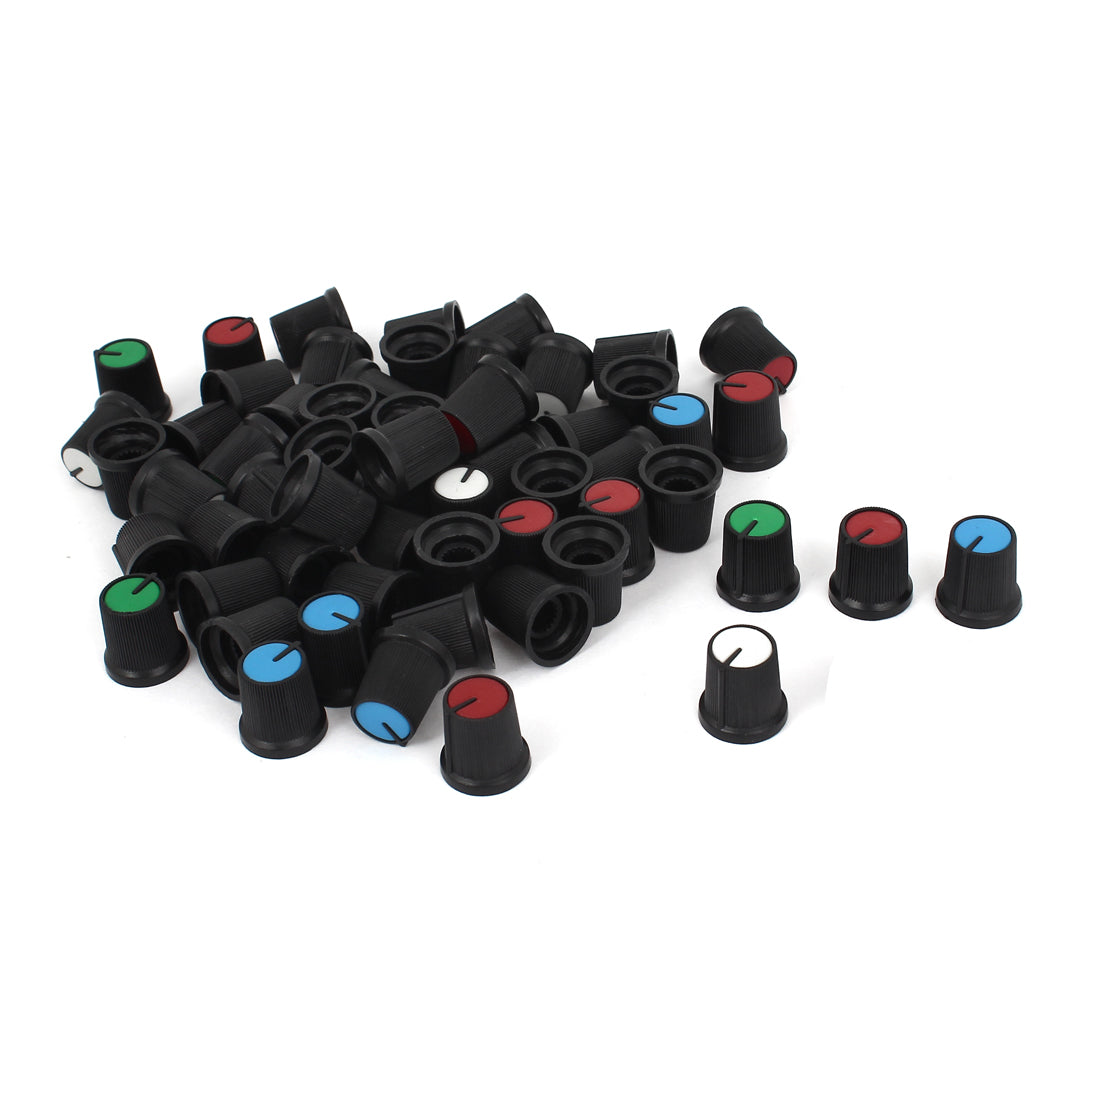 uxcell Uxcell 60 Pcs 6mm Knurled Shaft Assorted Color Potentiometer Rotary Knob Caps 15mmx15mm